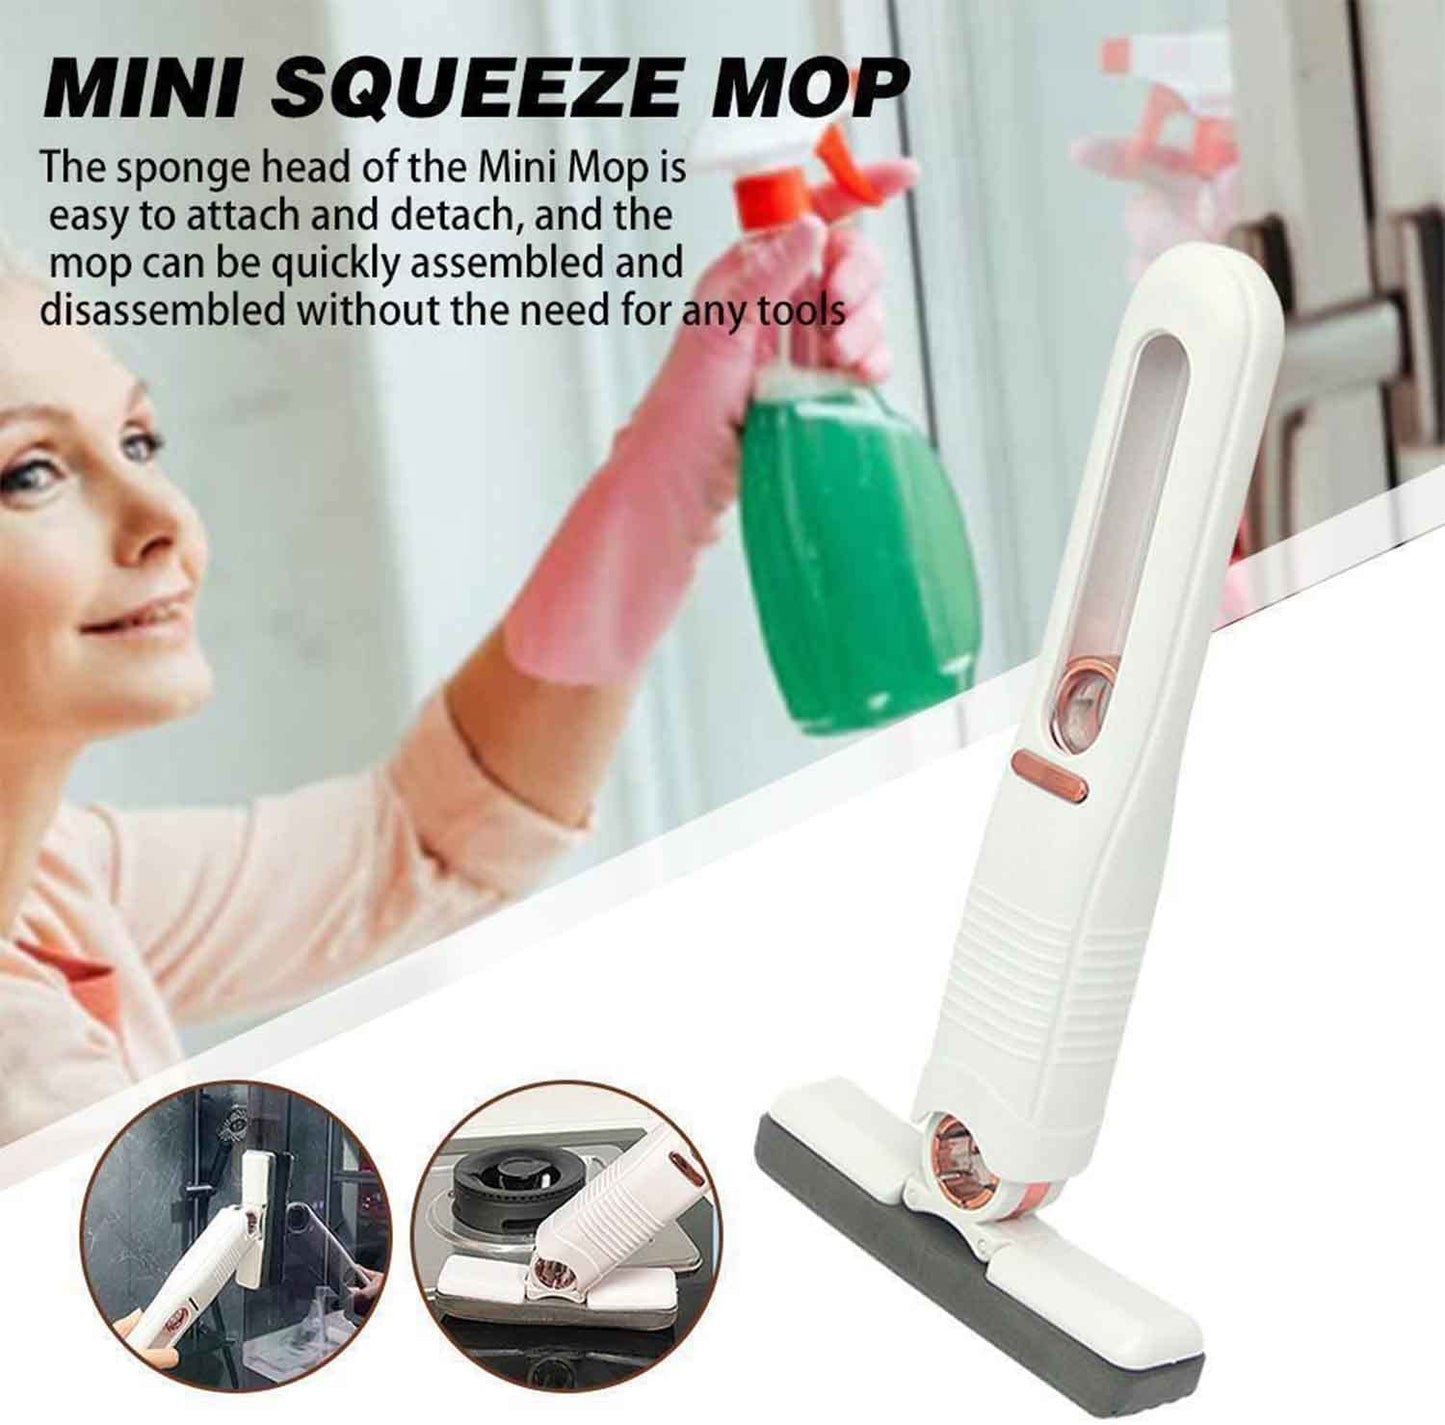 Portable Self-Squeeze Mini Mop for Cleaning